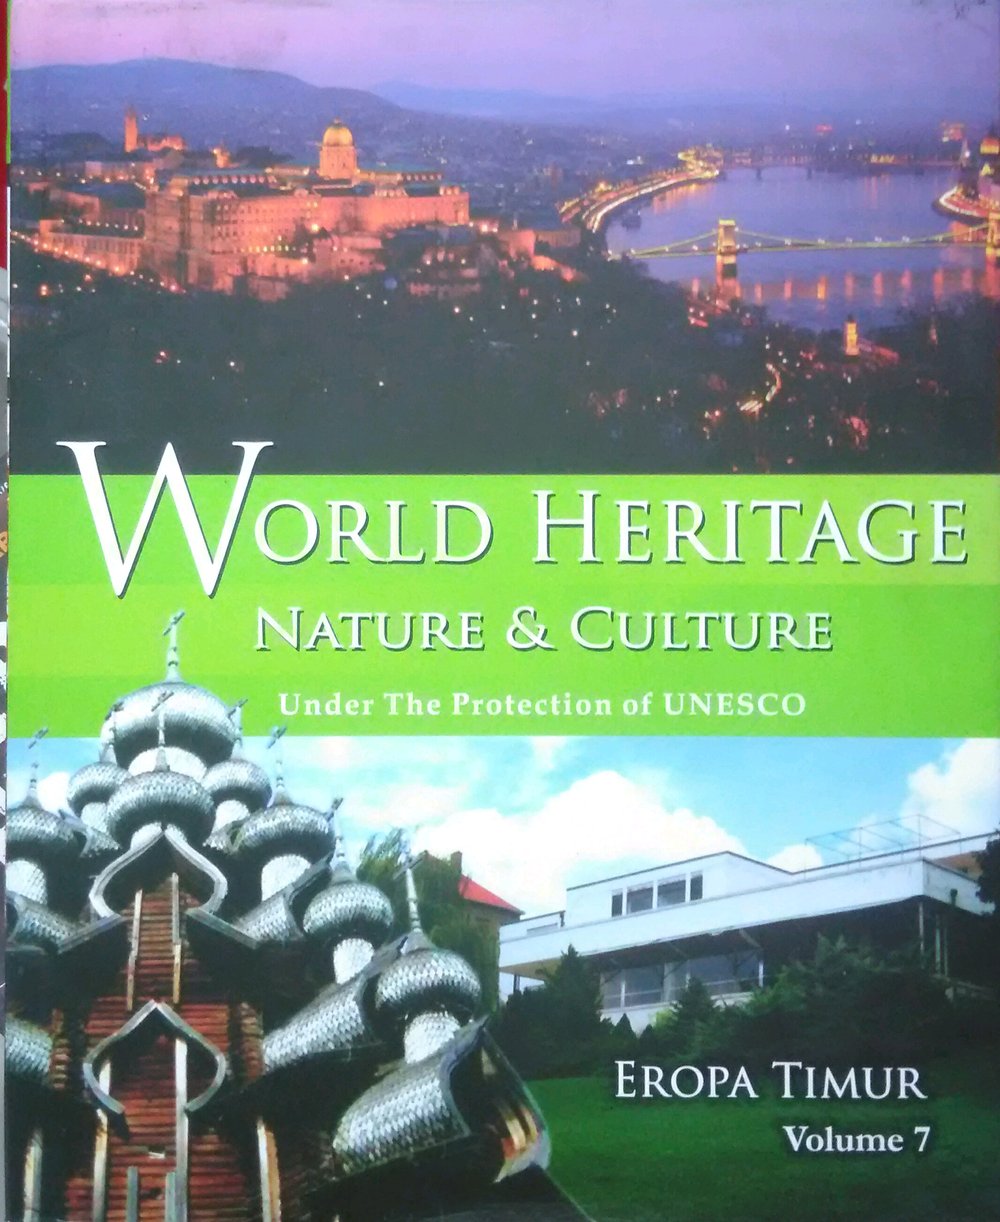 World heritage nature & culture under the protection of UNESCO volume 7 :  Eropa timur